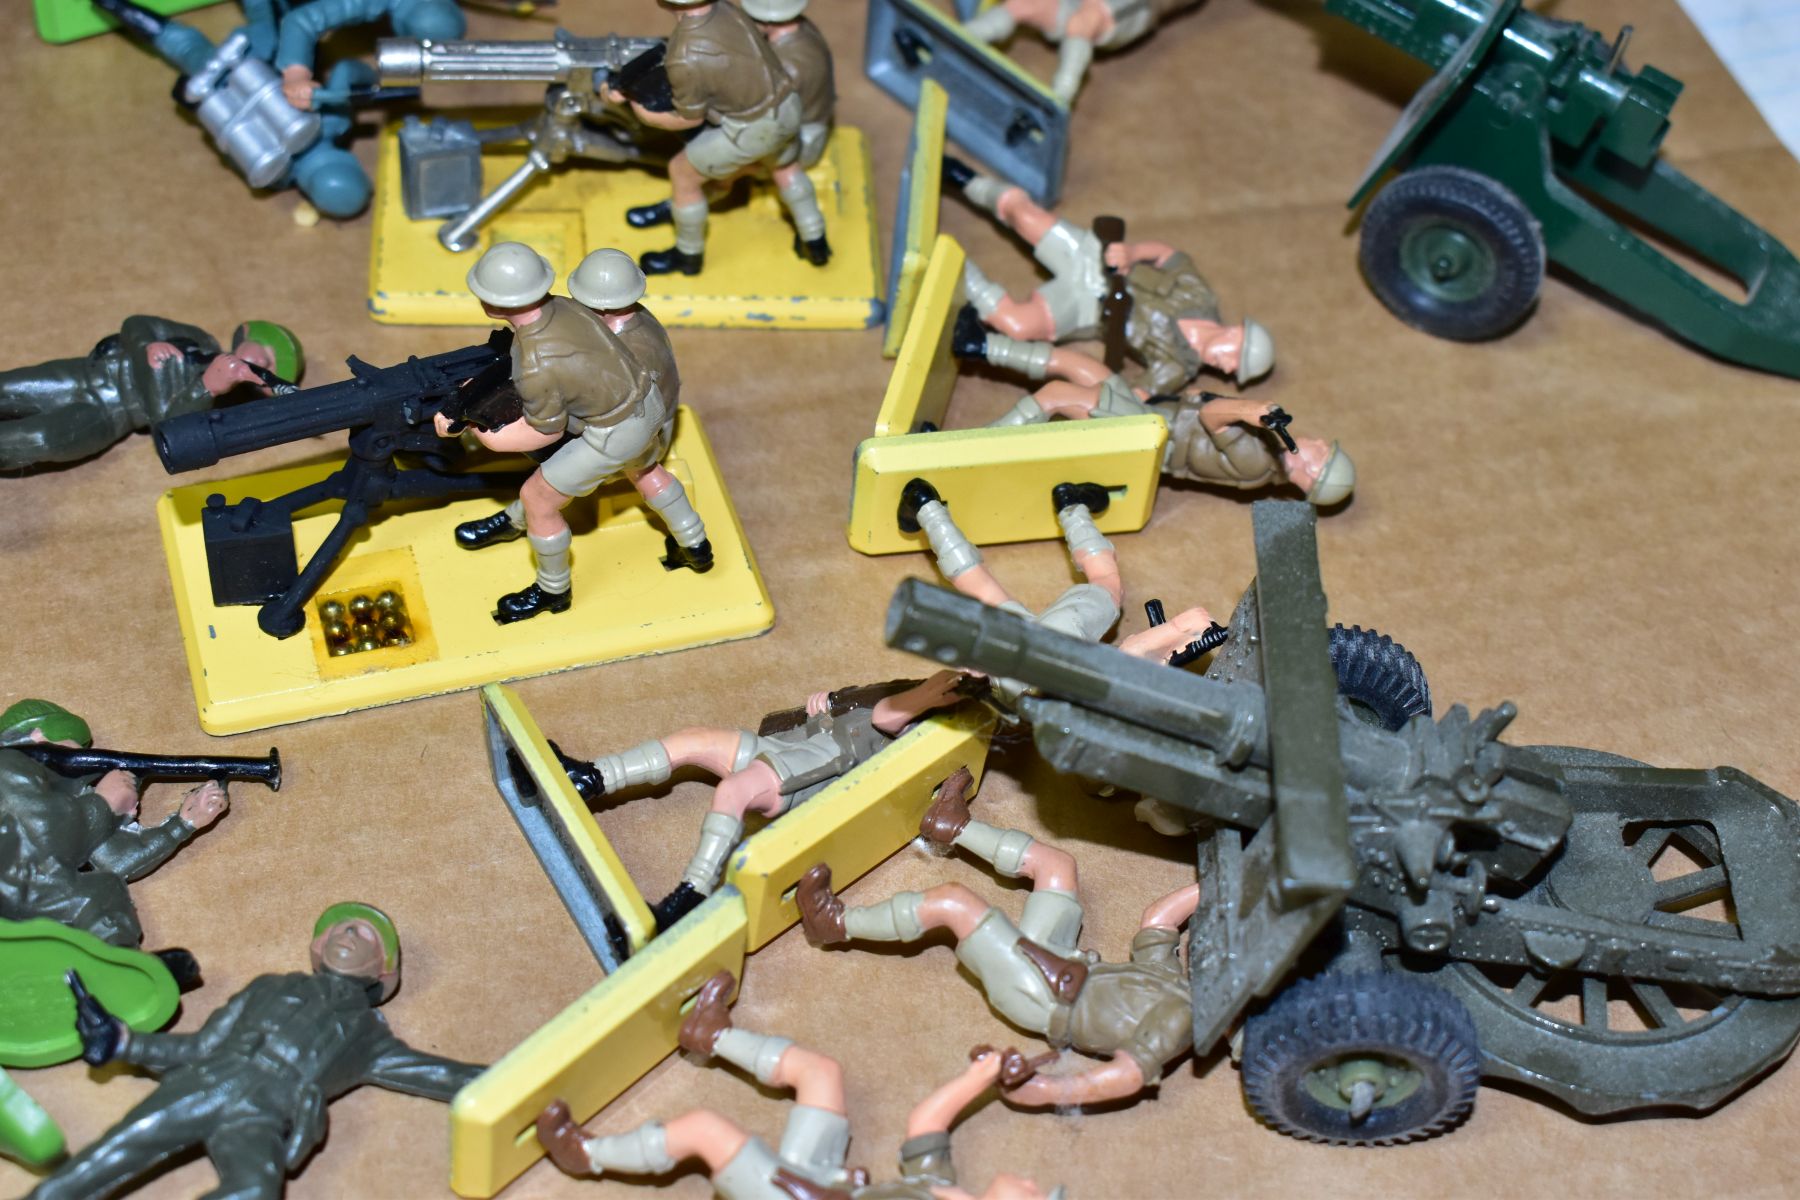 A QUANTITY OF BRITAINS AND AIRFIX 1/32 SCALE SOLDIER FIGURES, many have been painted and detailed to - Image 9 of 13